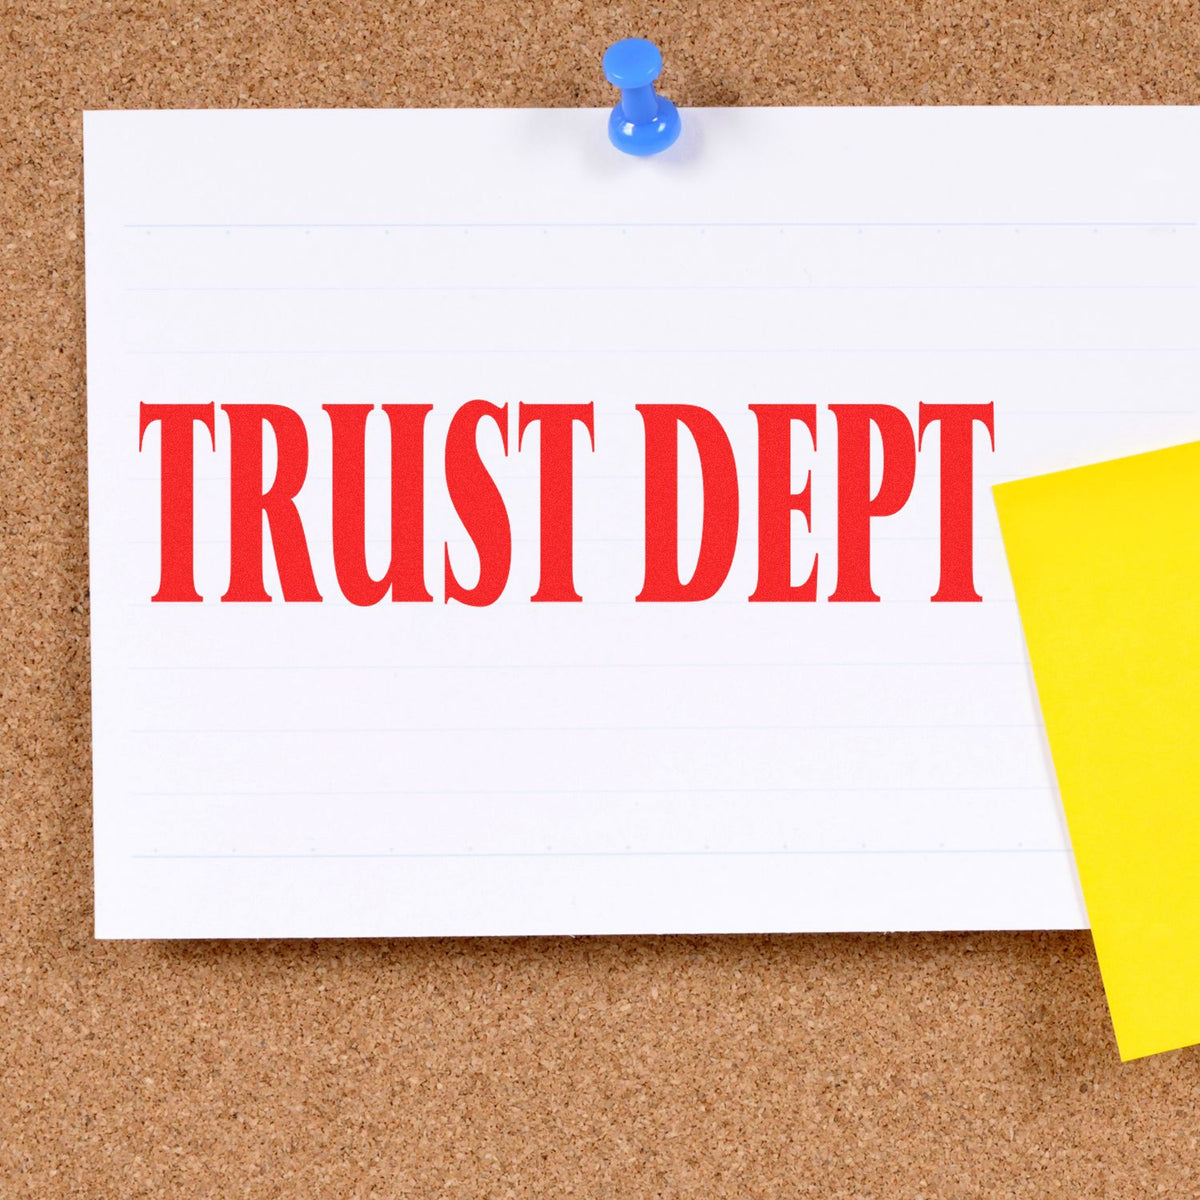 Large Trust Dept Rubber Stamp In Use Photo